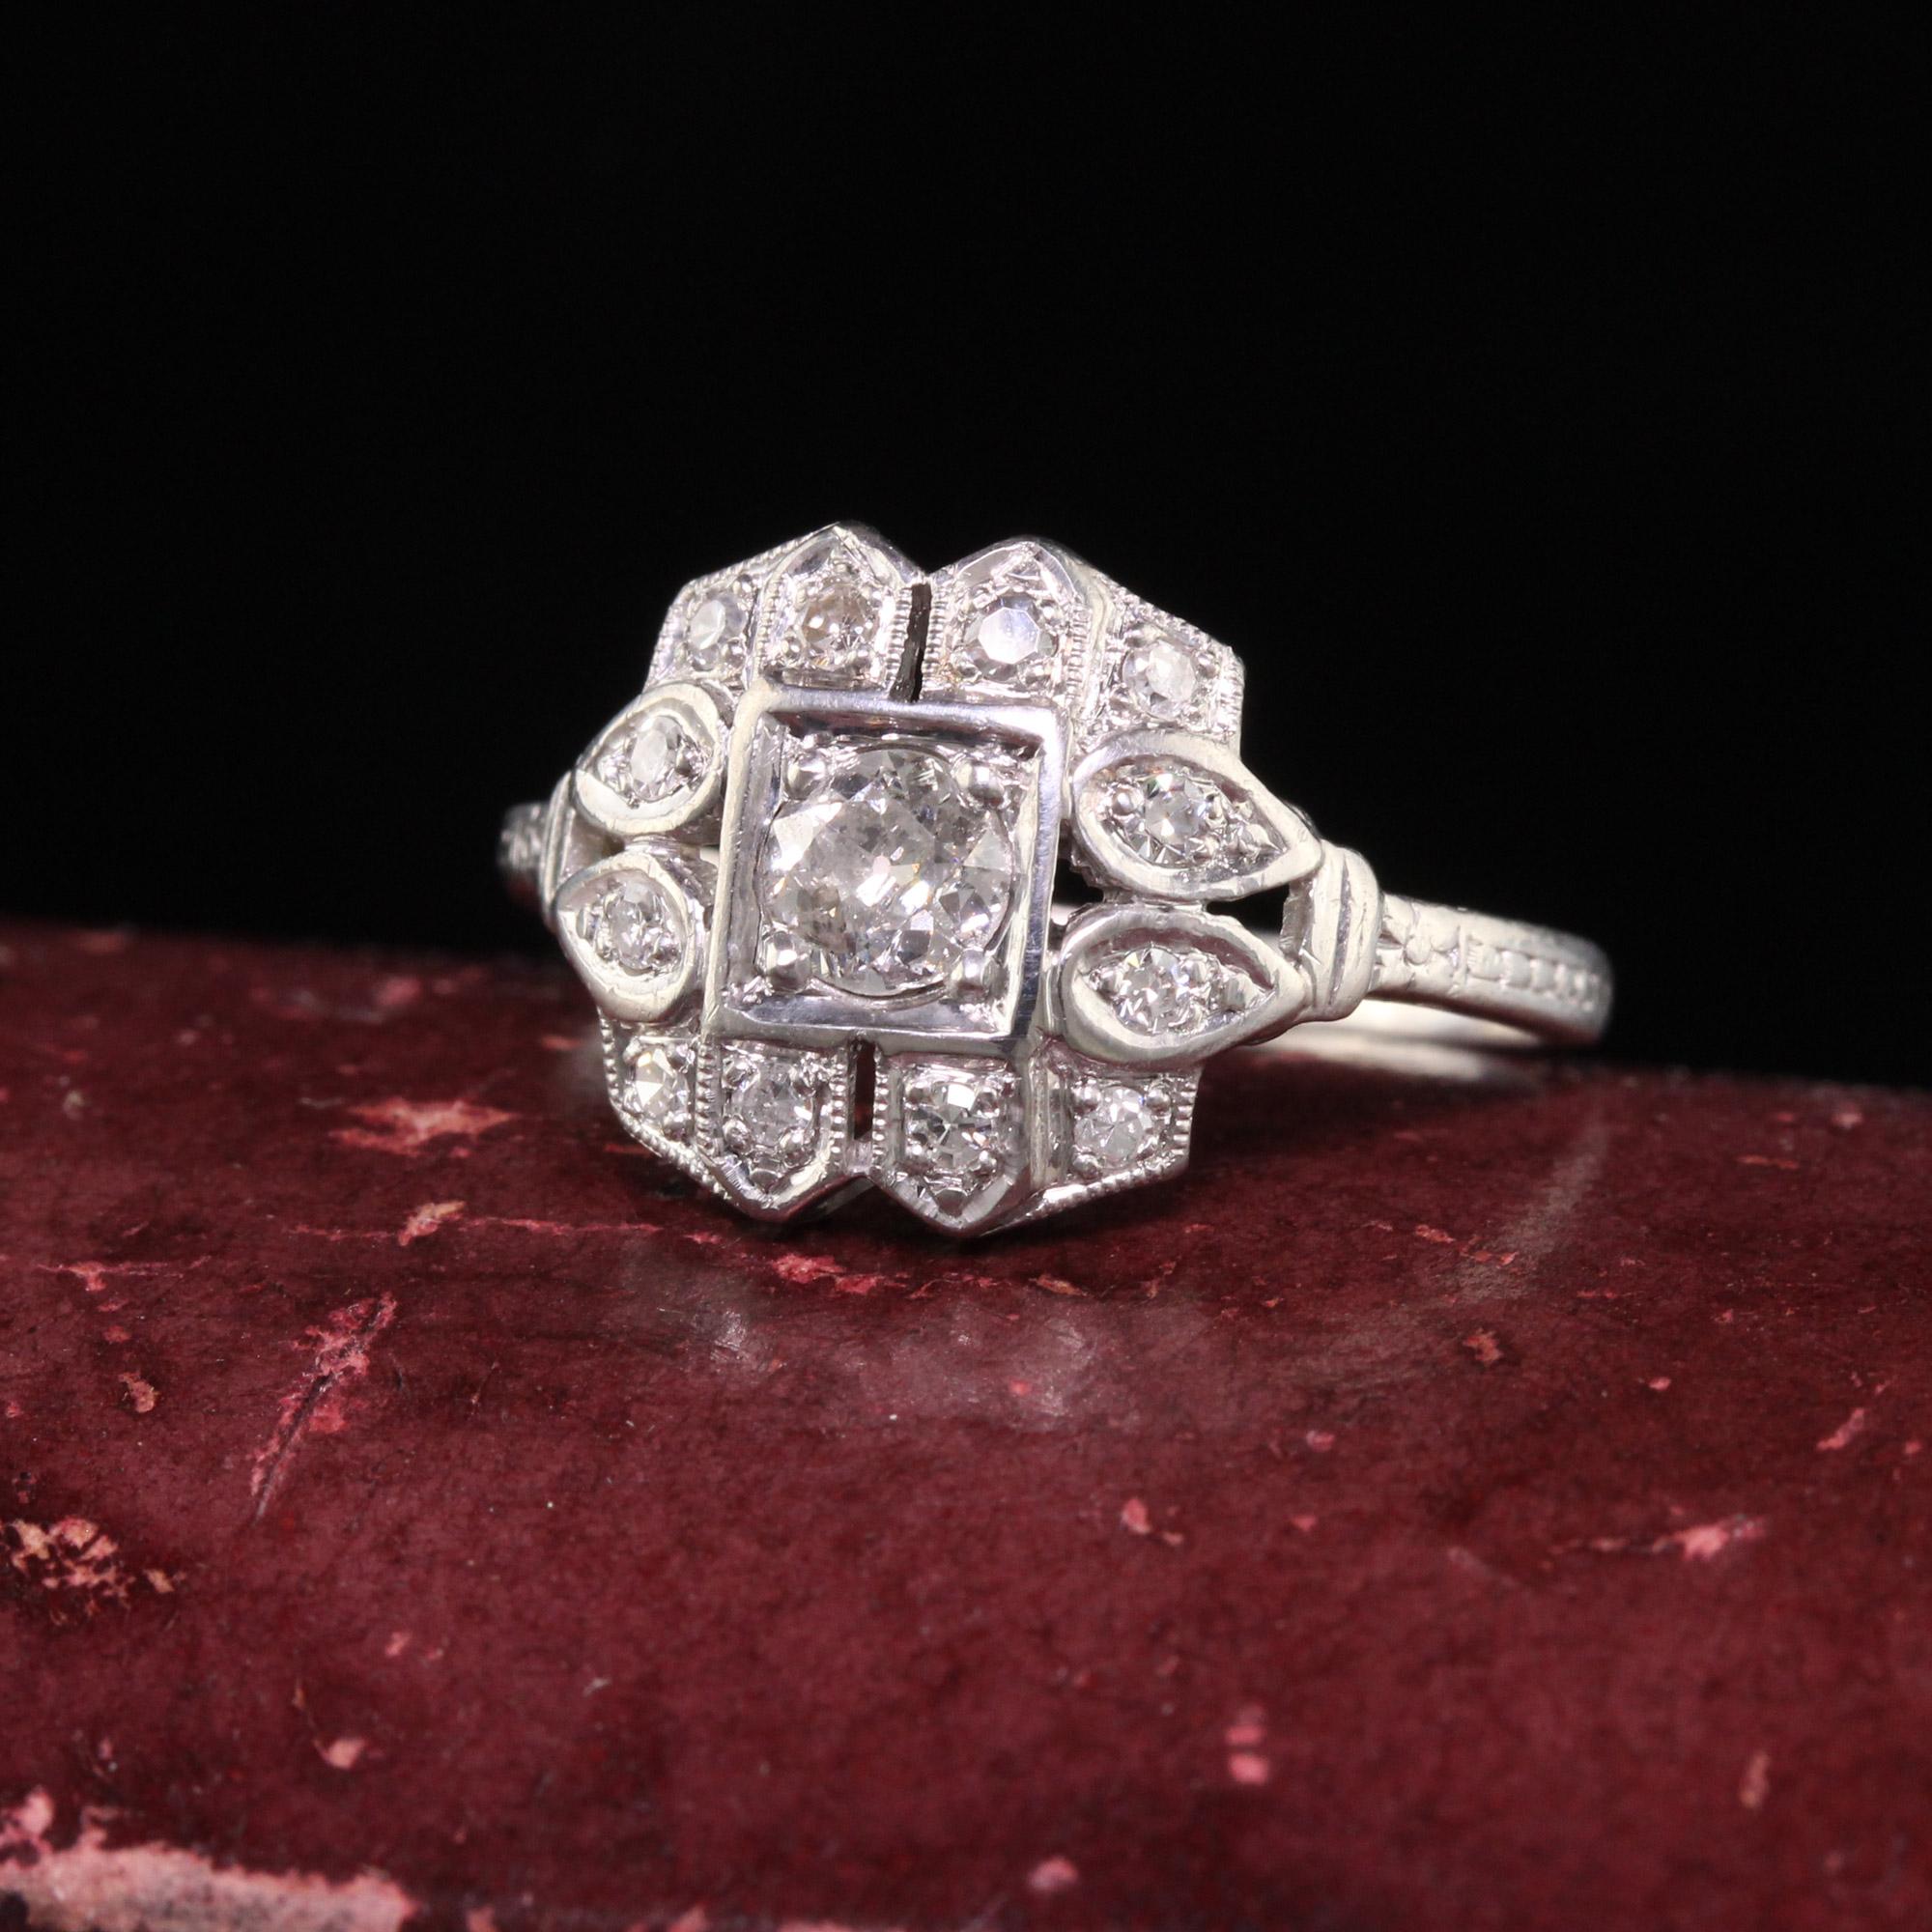 Beautiful Antique Art Deco Platinum Old European Cut Diamond Engagement Ring. This beautiful ring is crafted in platinum. There are old european cut diamond all on the top of the ring. The inside of the shank is engraved 